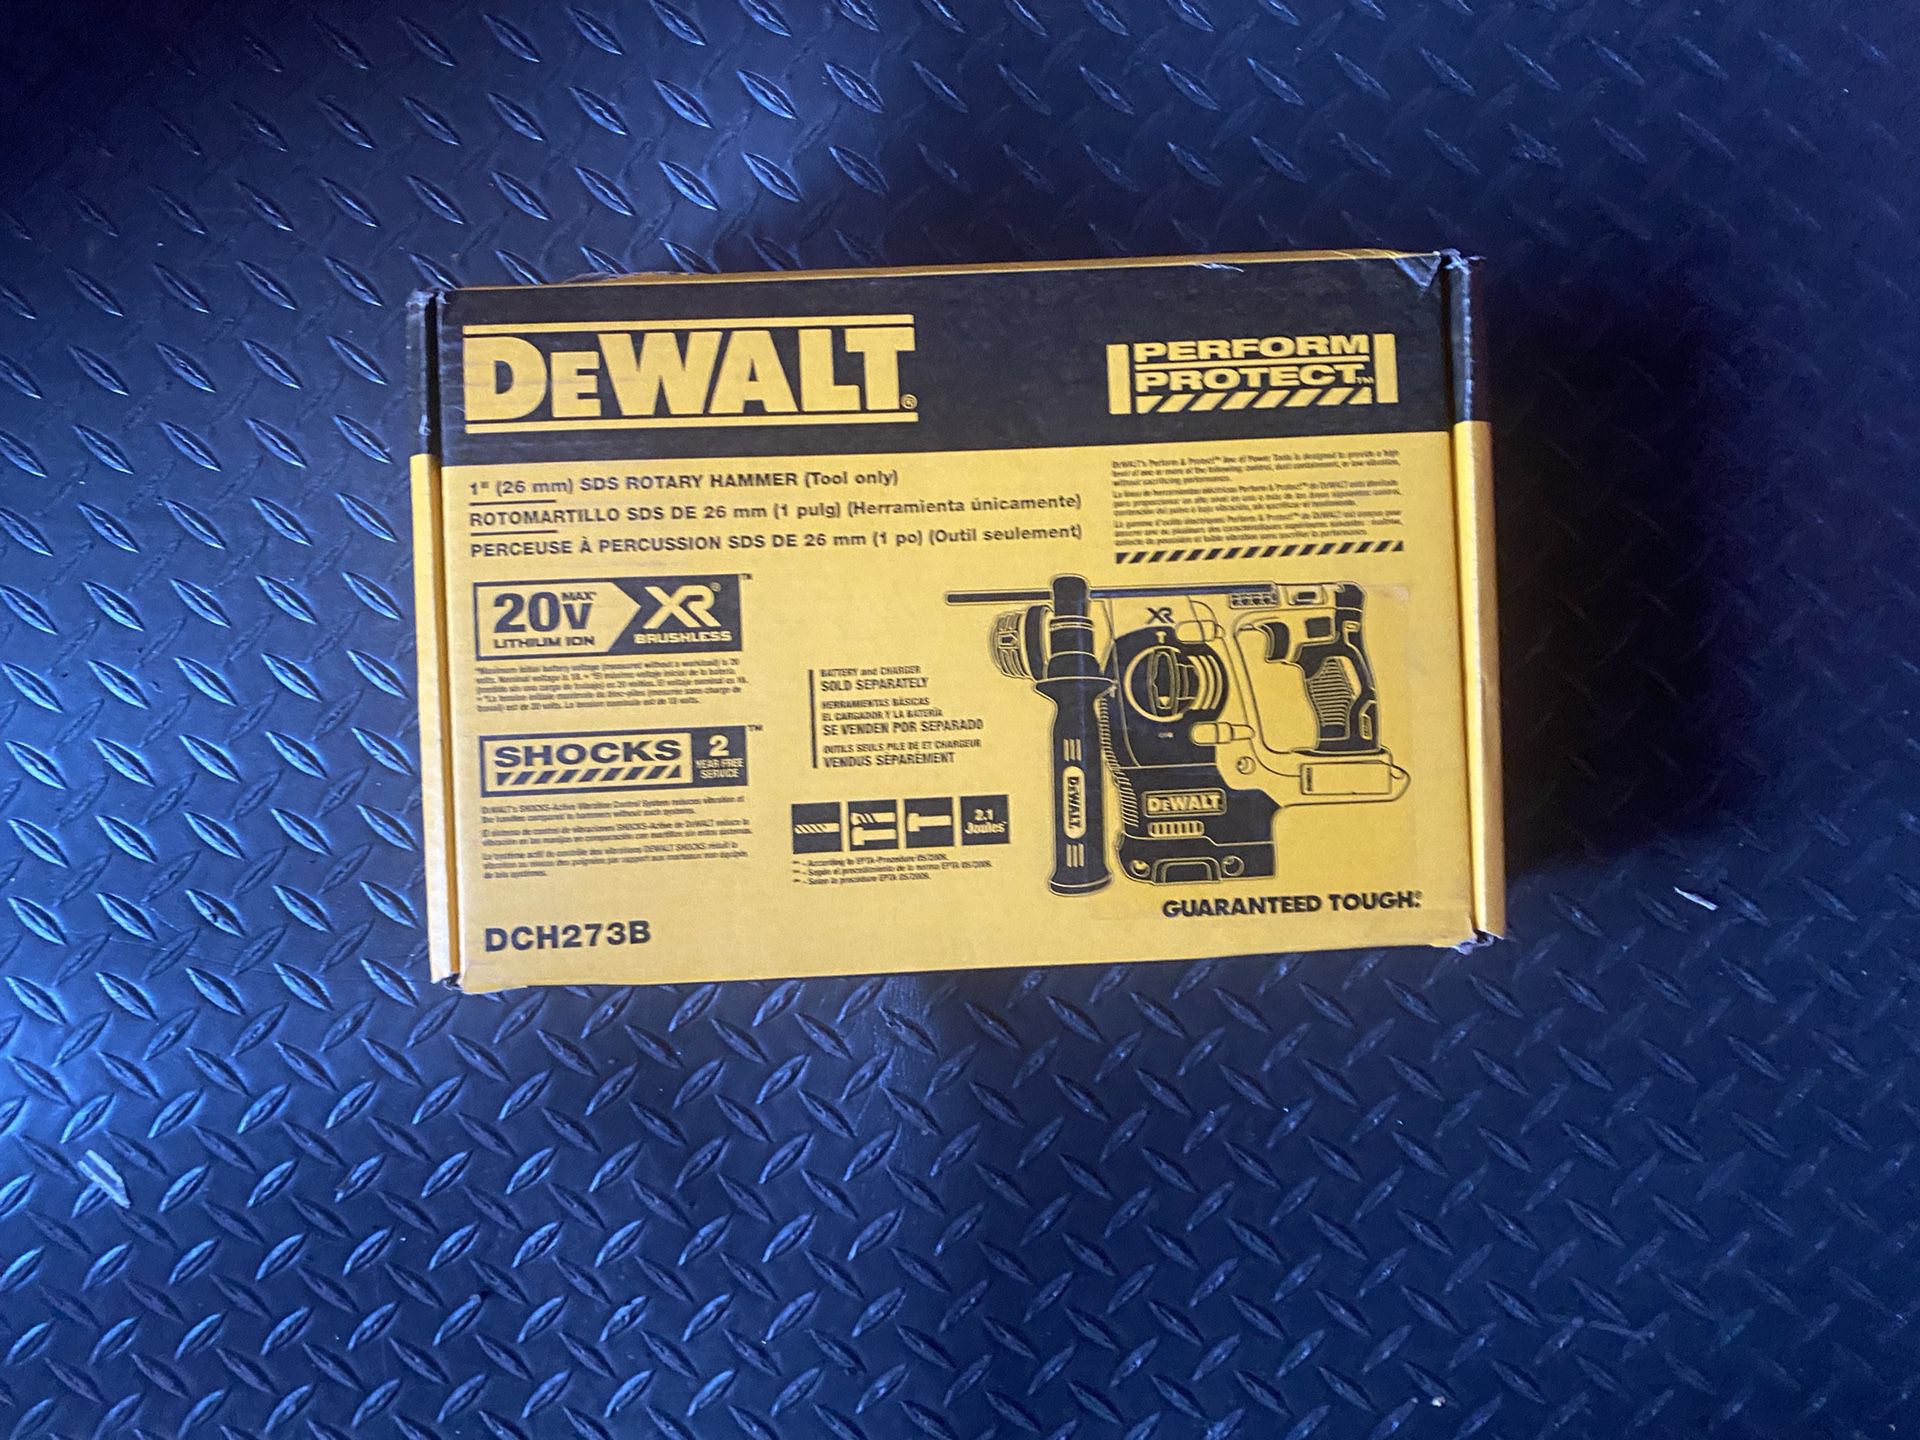 Dewalt 1” SDS ROTARY HAMMER Tool Only New